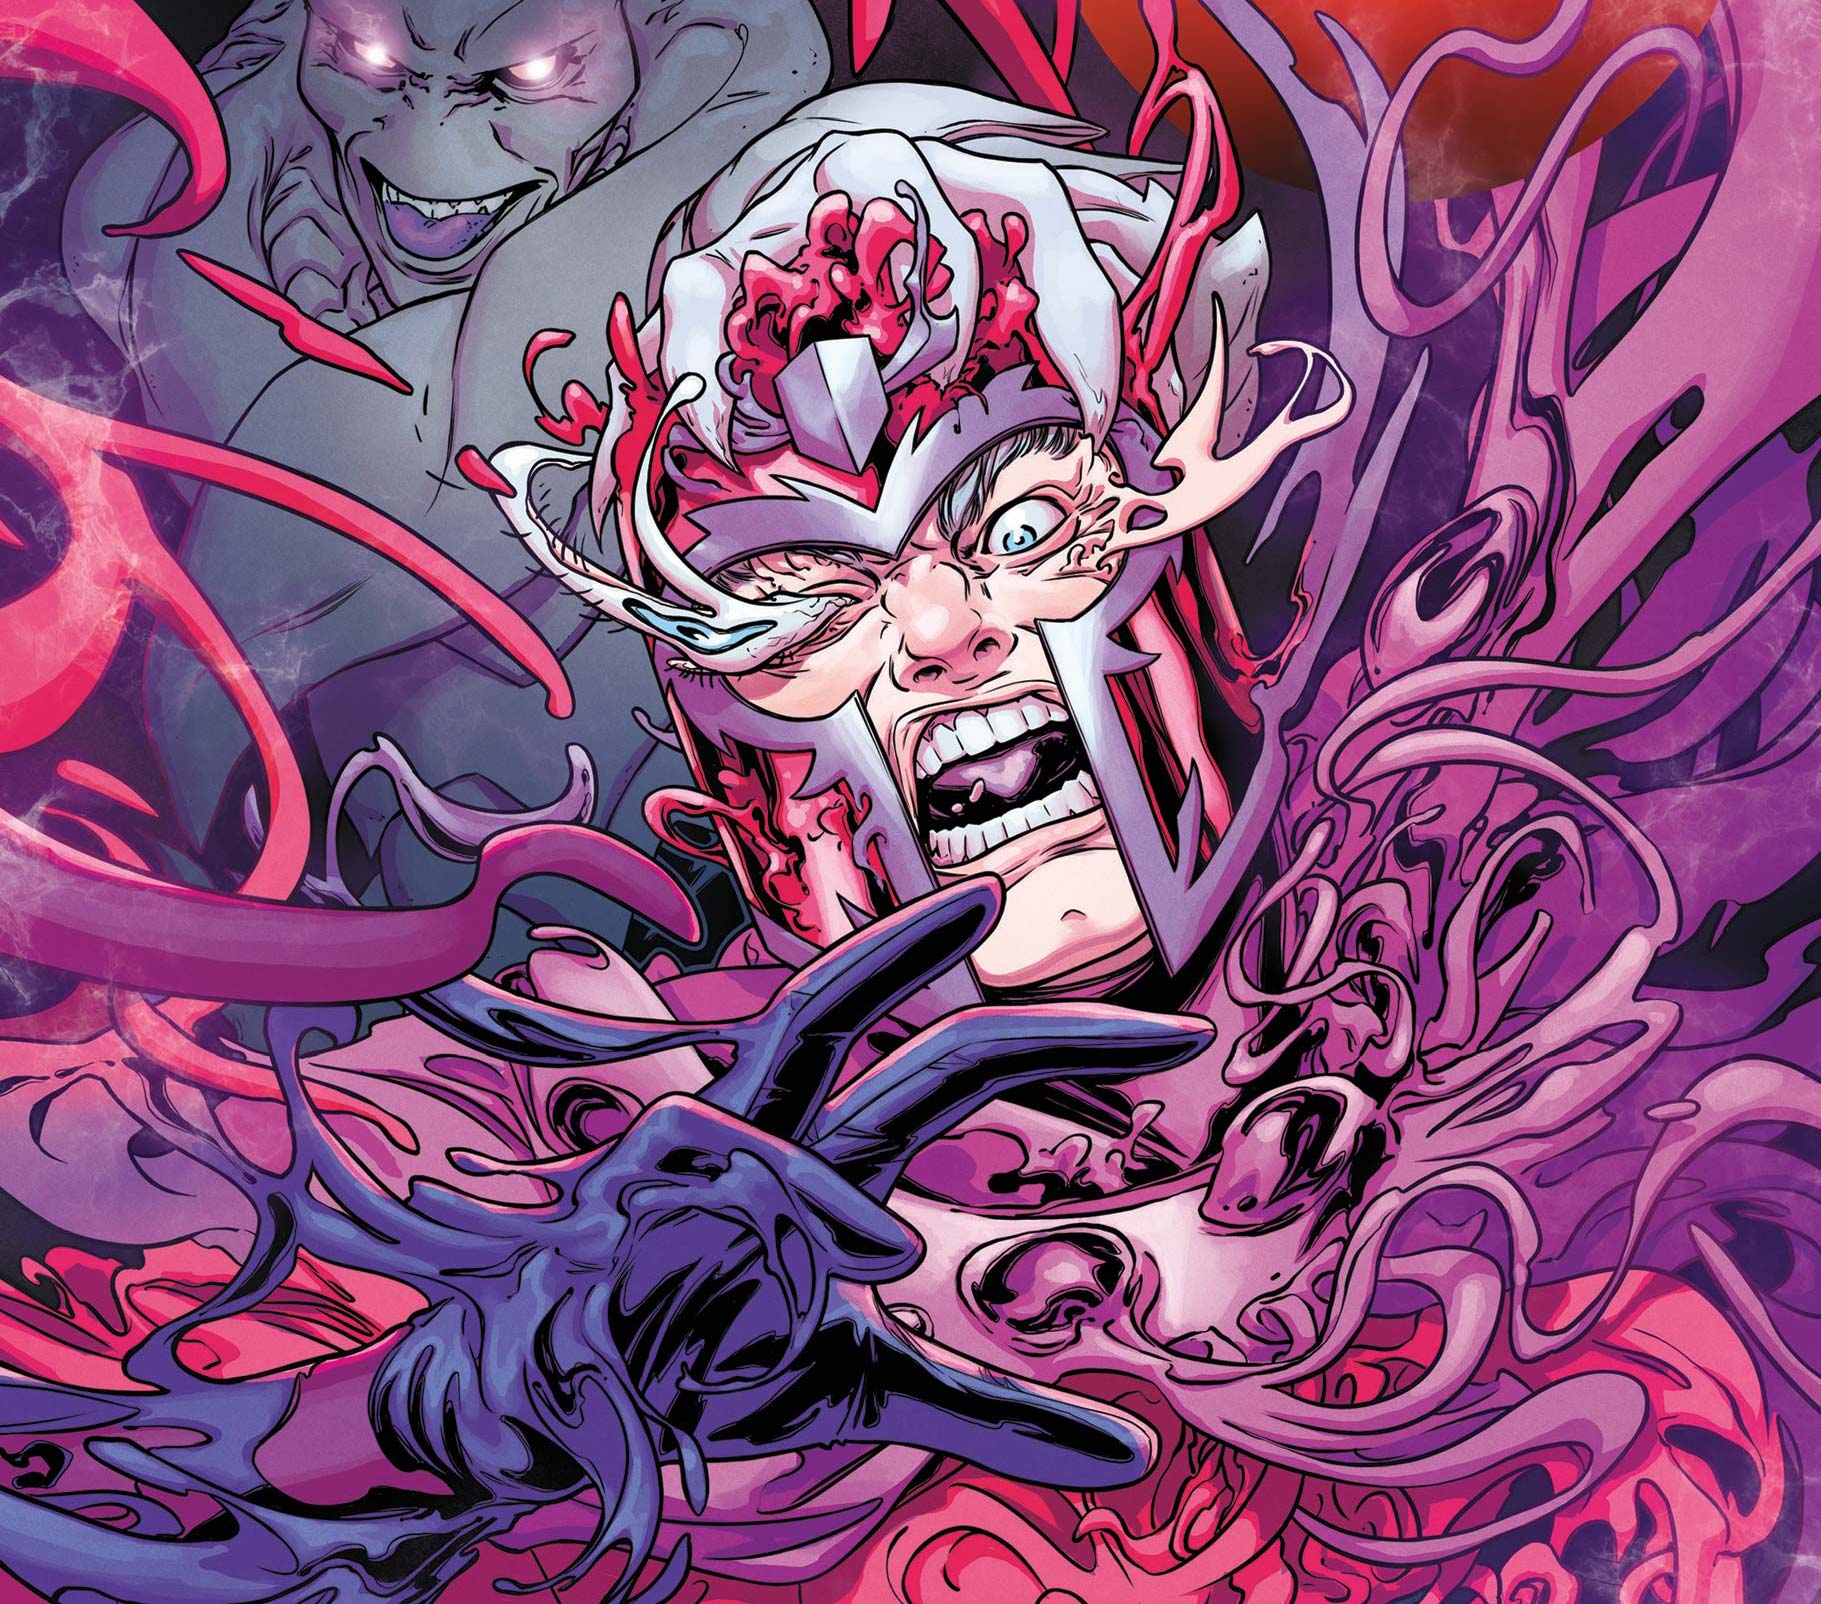 'X-Men: Red' #3 continues to evolve Magneto